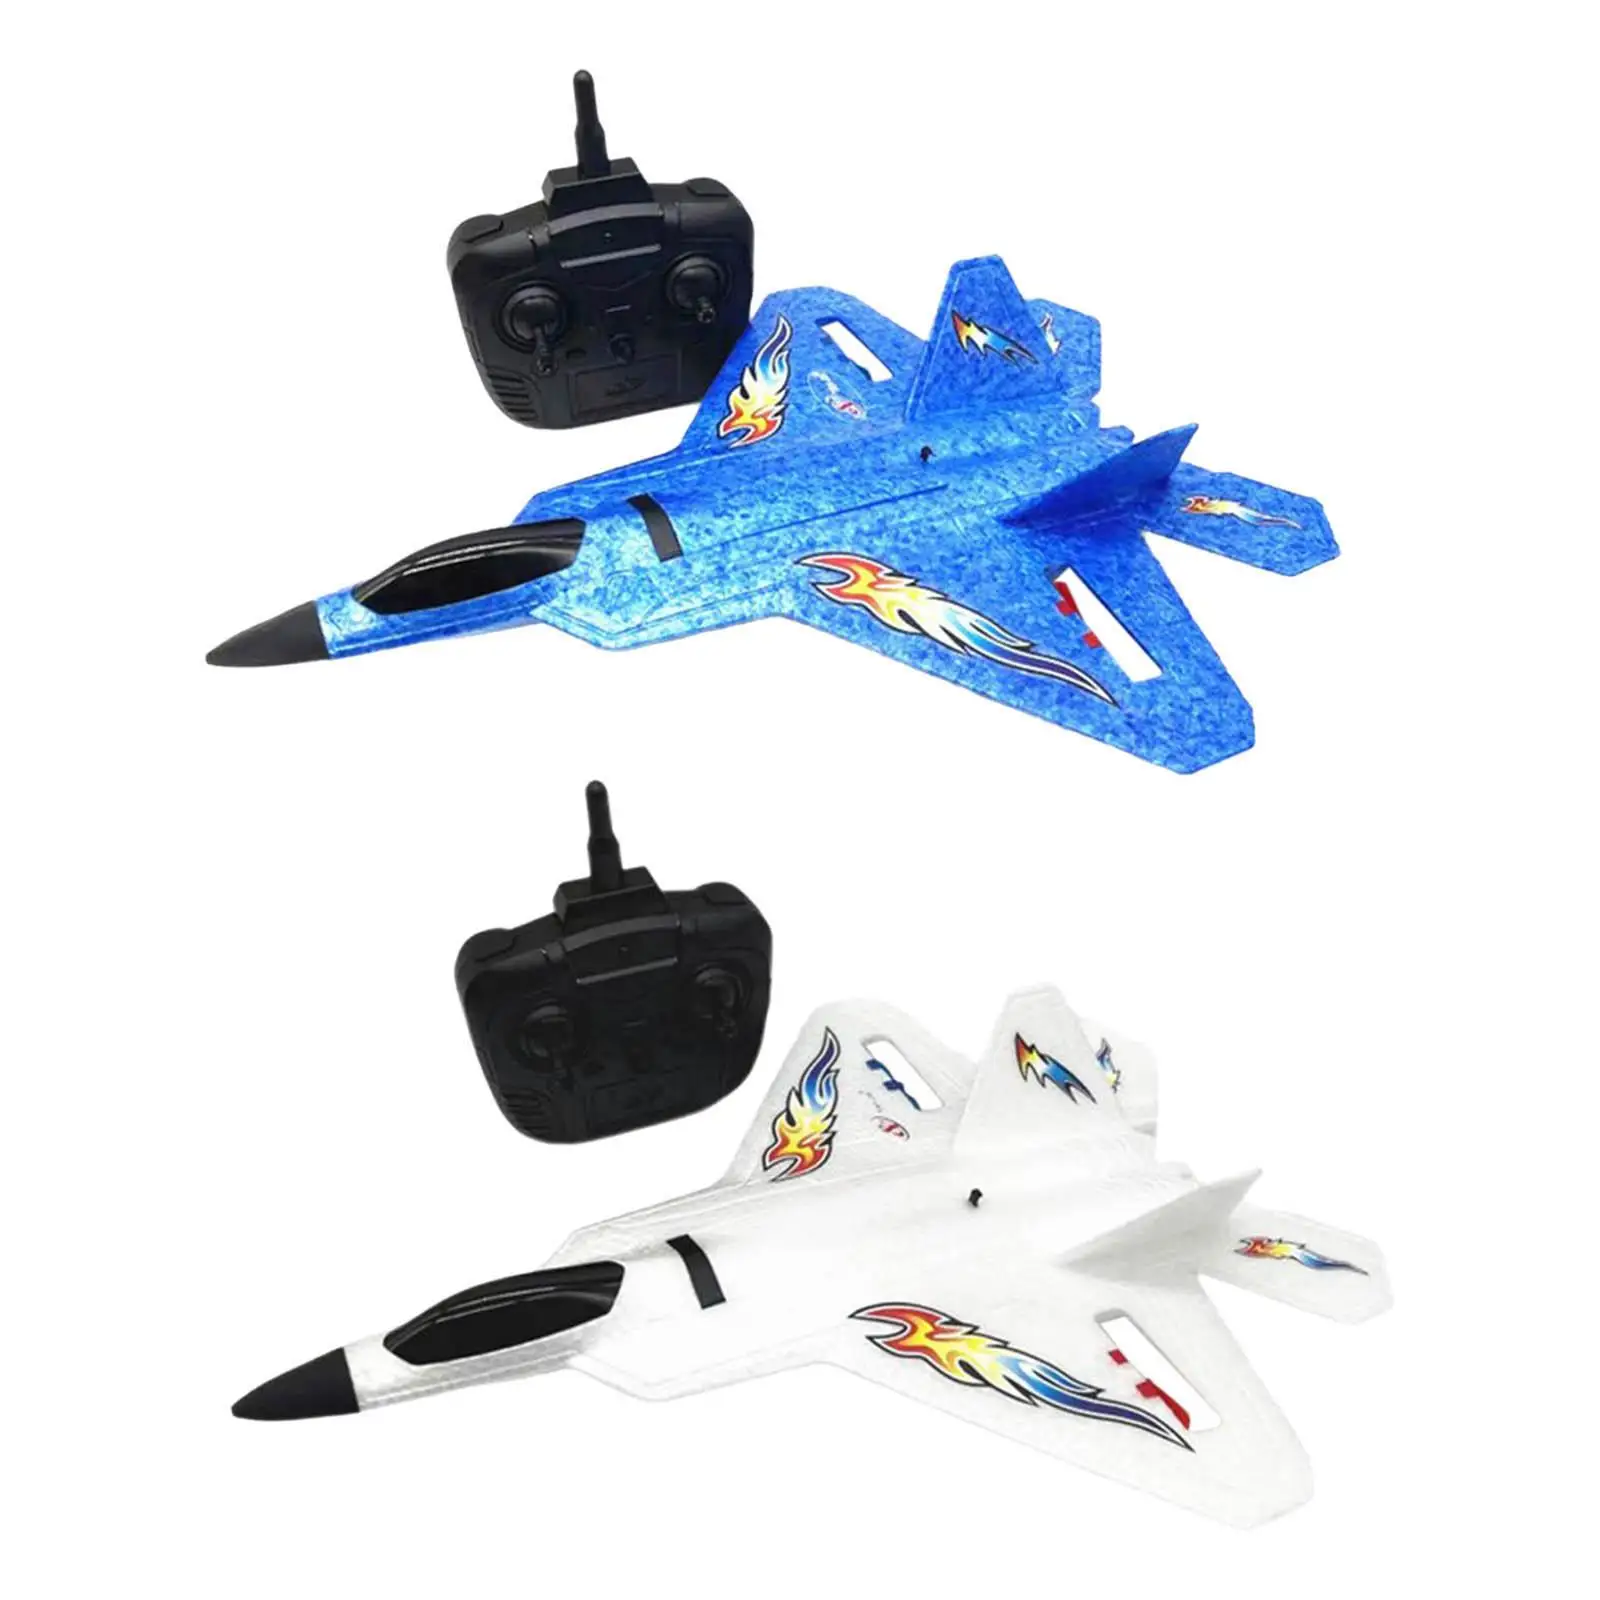 EPP Foam Plane Toys  to .4G 4CH Fixed Wing RC Glider